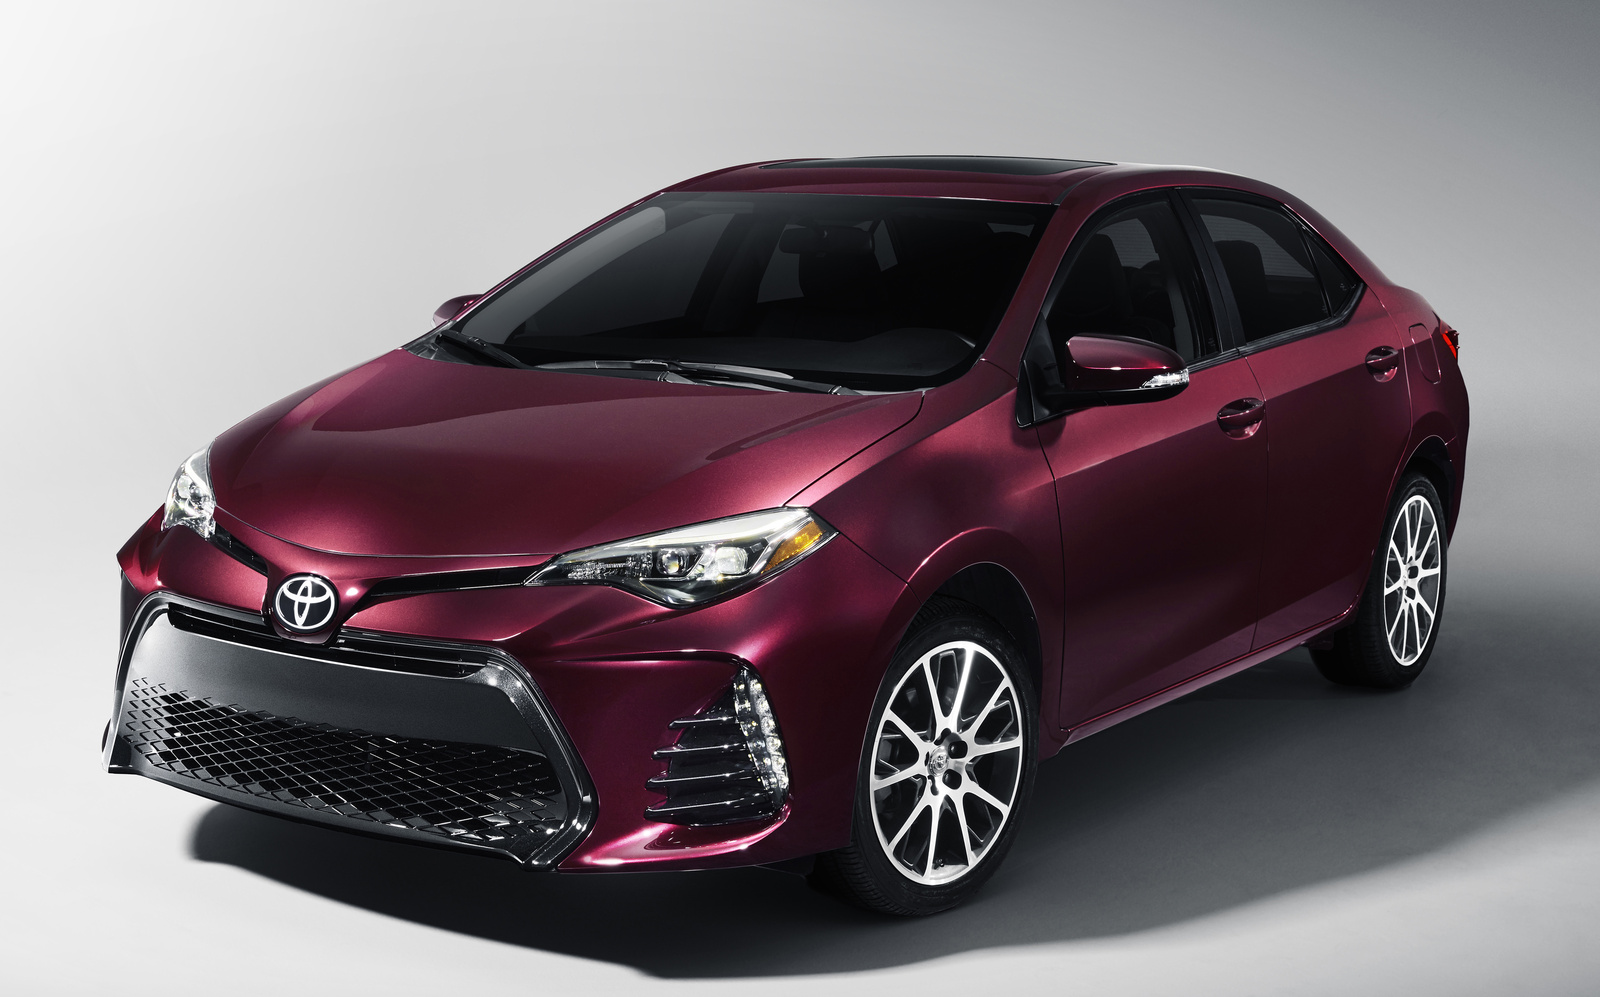 2017 Toyota Corolla: Prices, Reviews & Pictures - CarGurus